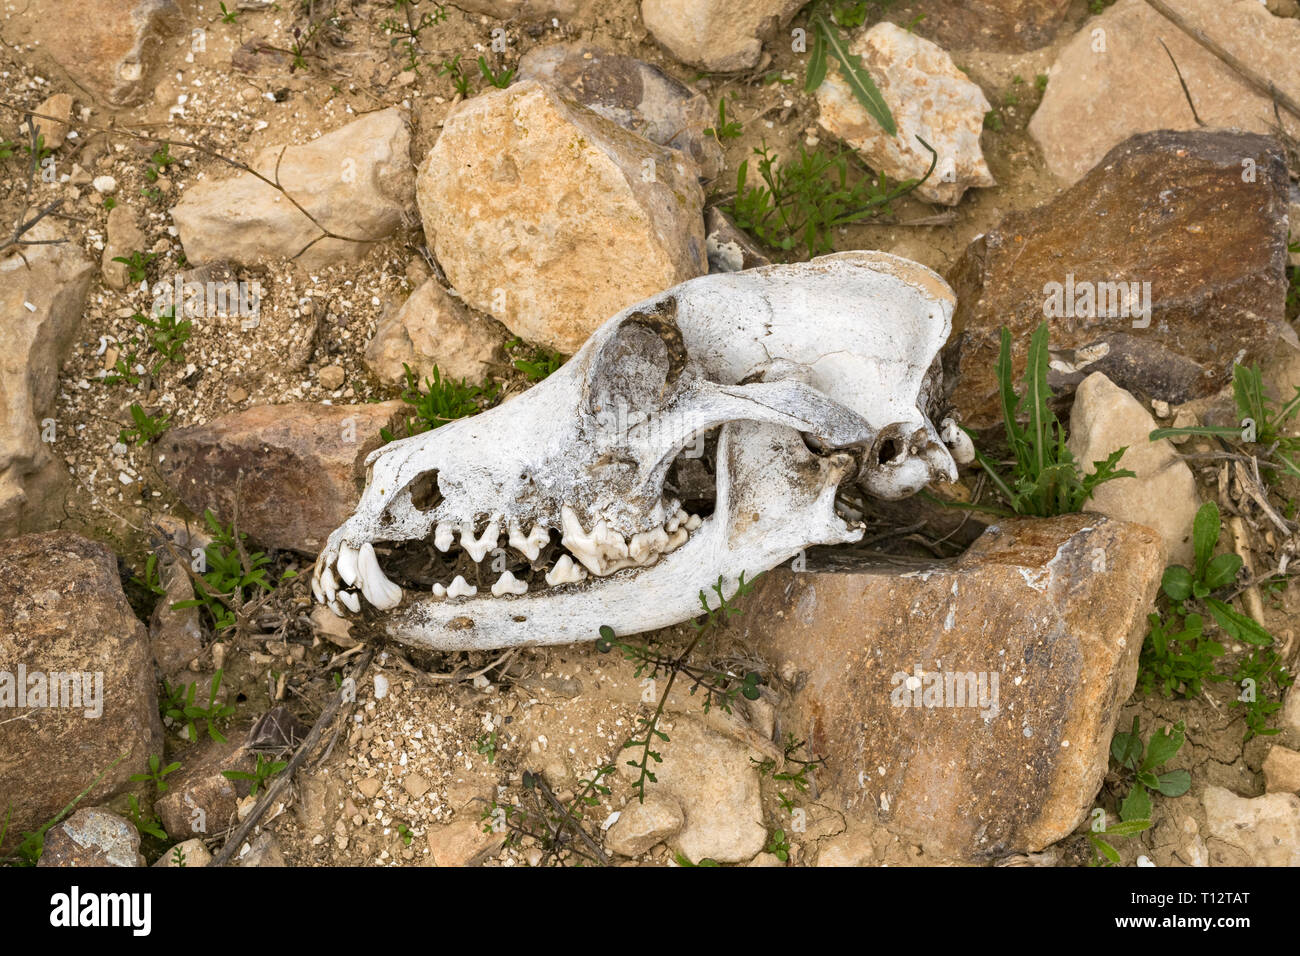 a complete bleached canine skull profile found on a desert hike in the winter near Arad in the Negev Desert of Israel Stock Photo